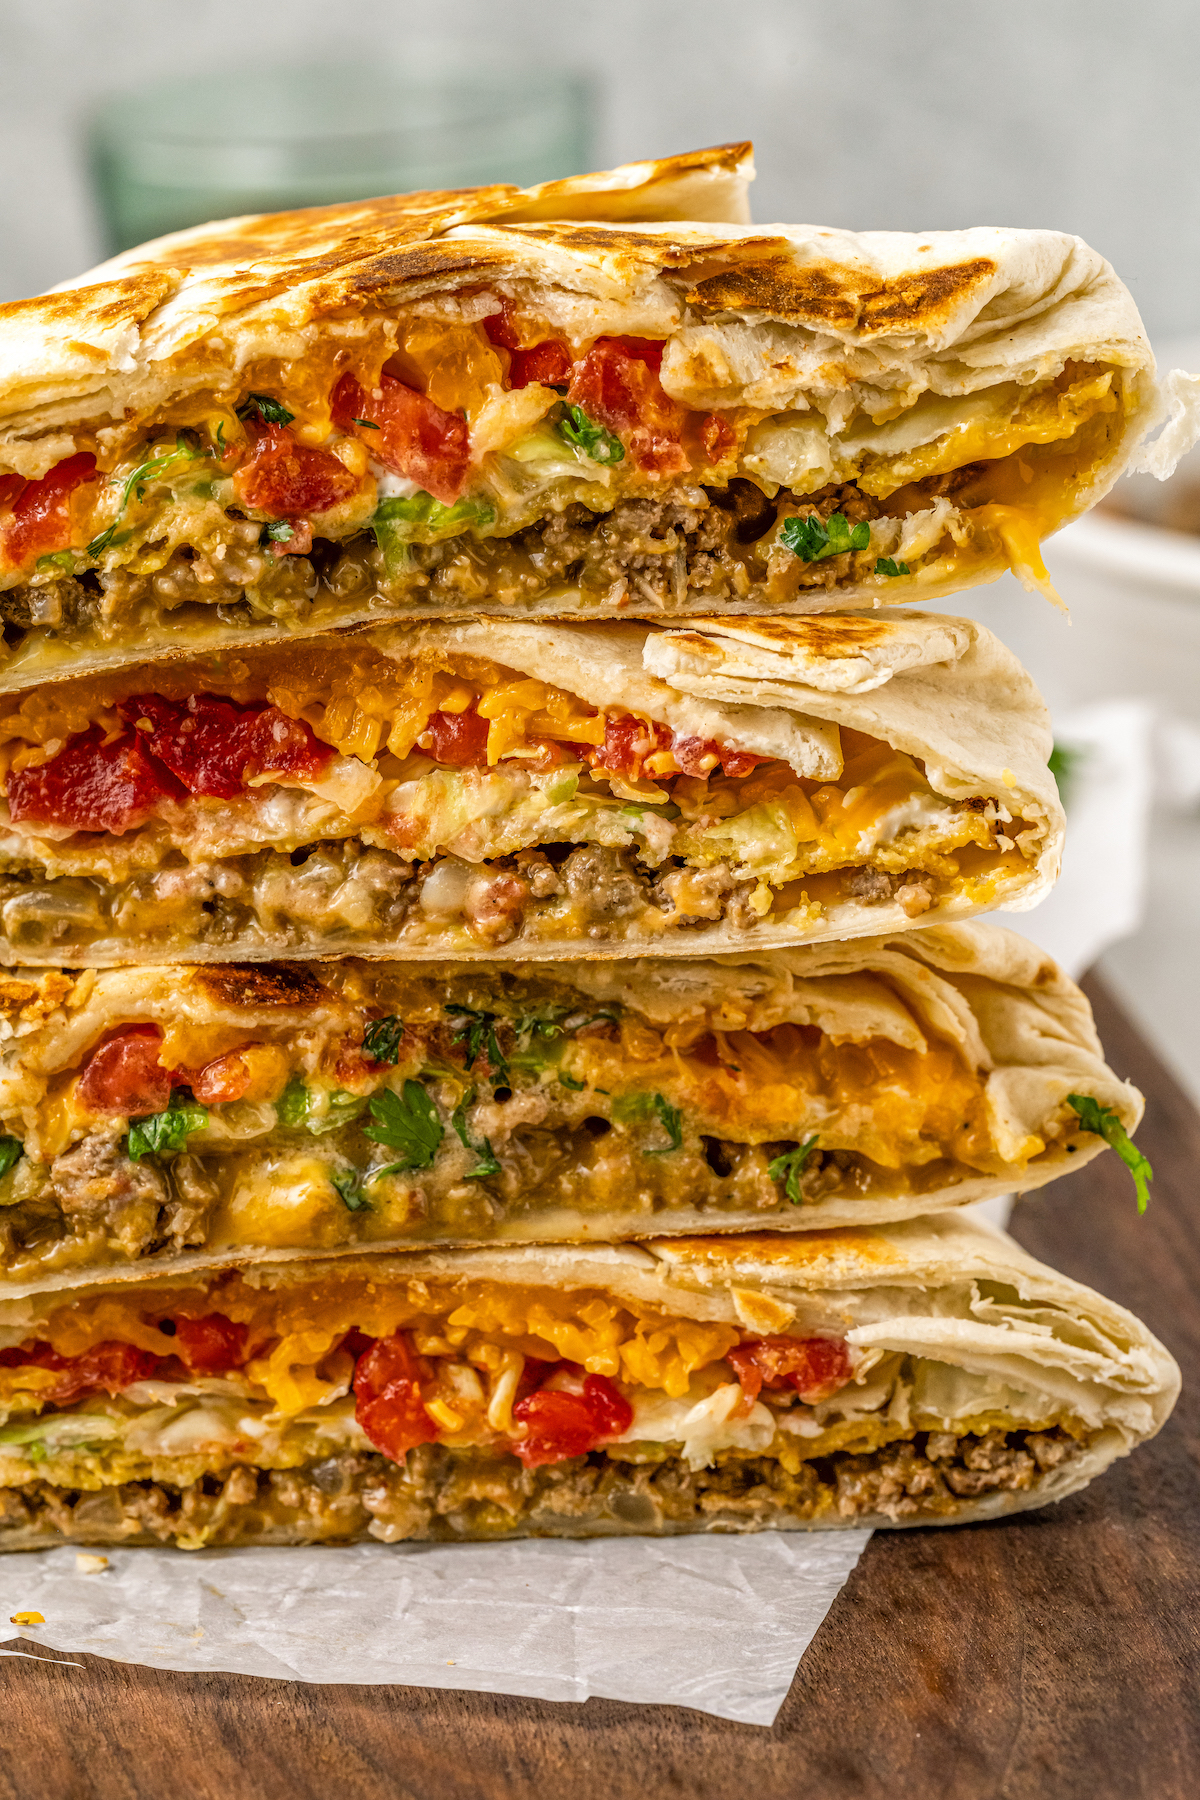 Four crunchwrap supremes cut in half to show the layered insides and then stacked on top of each other.